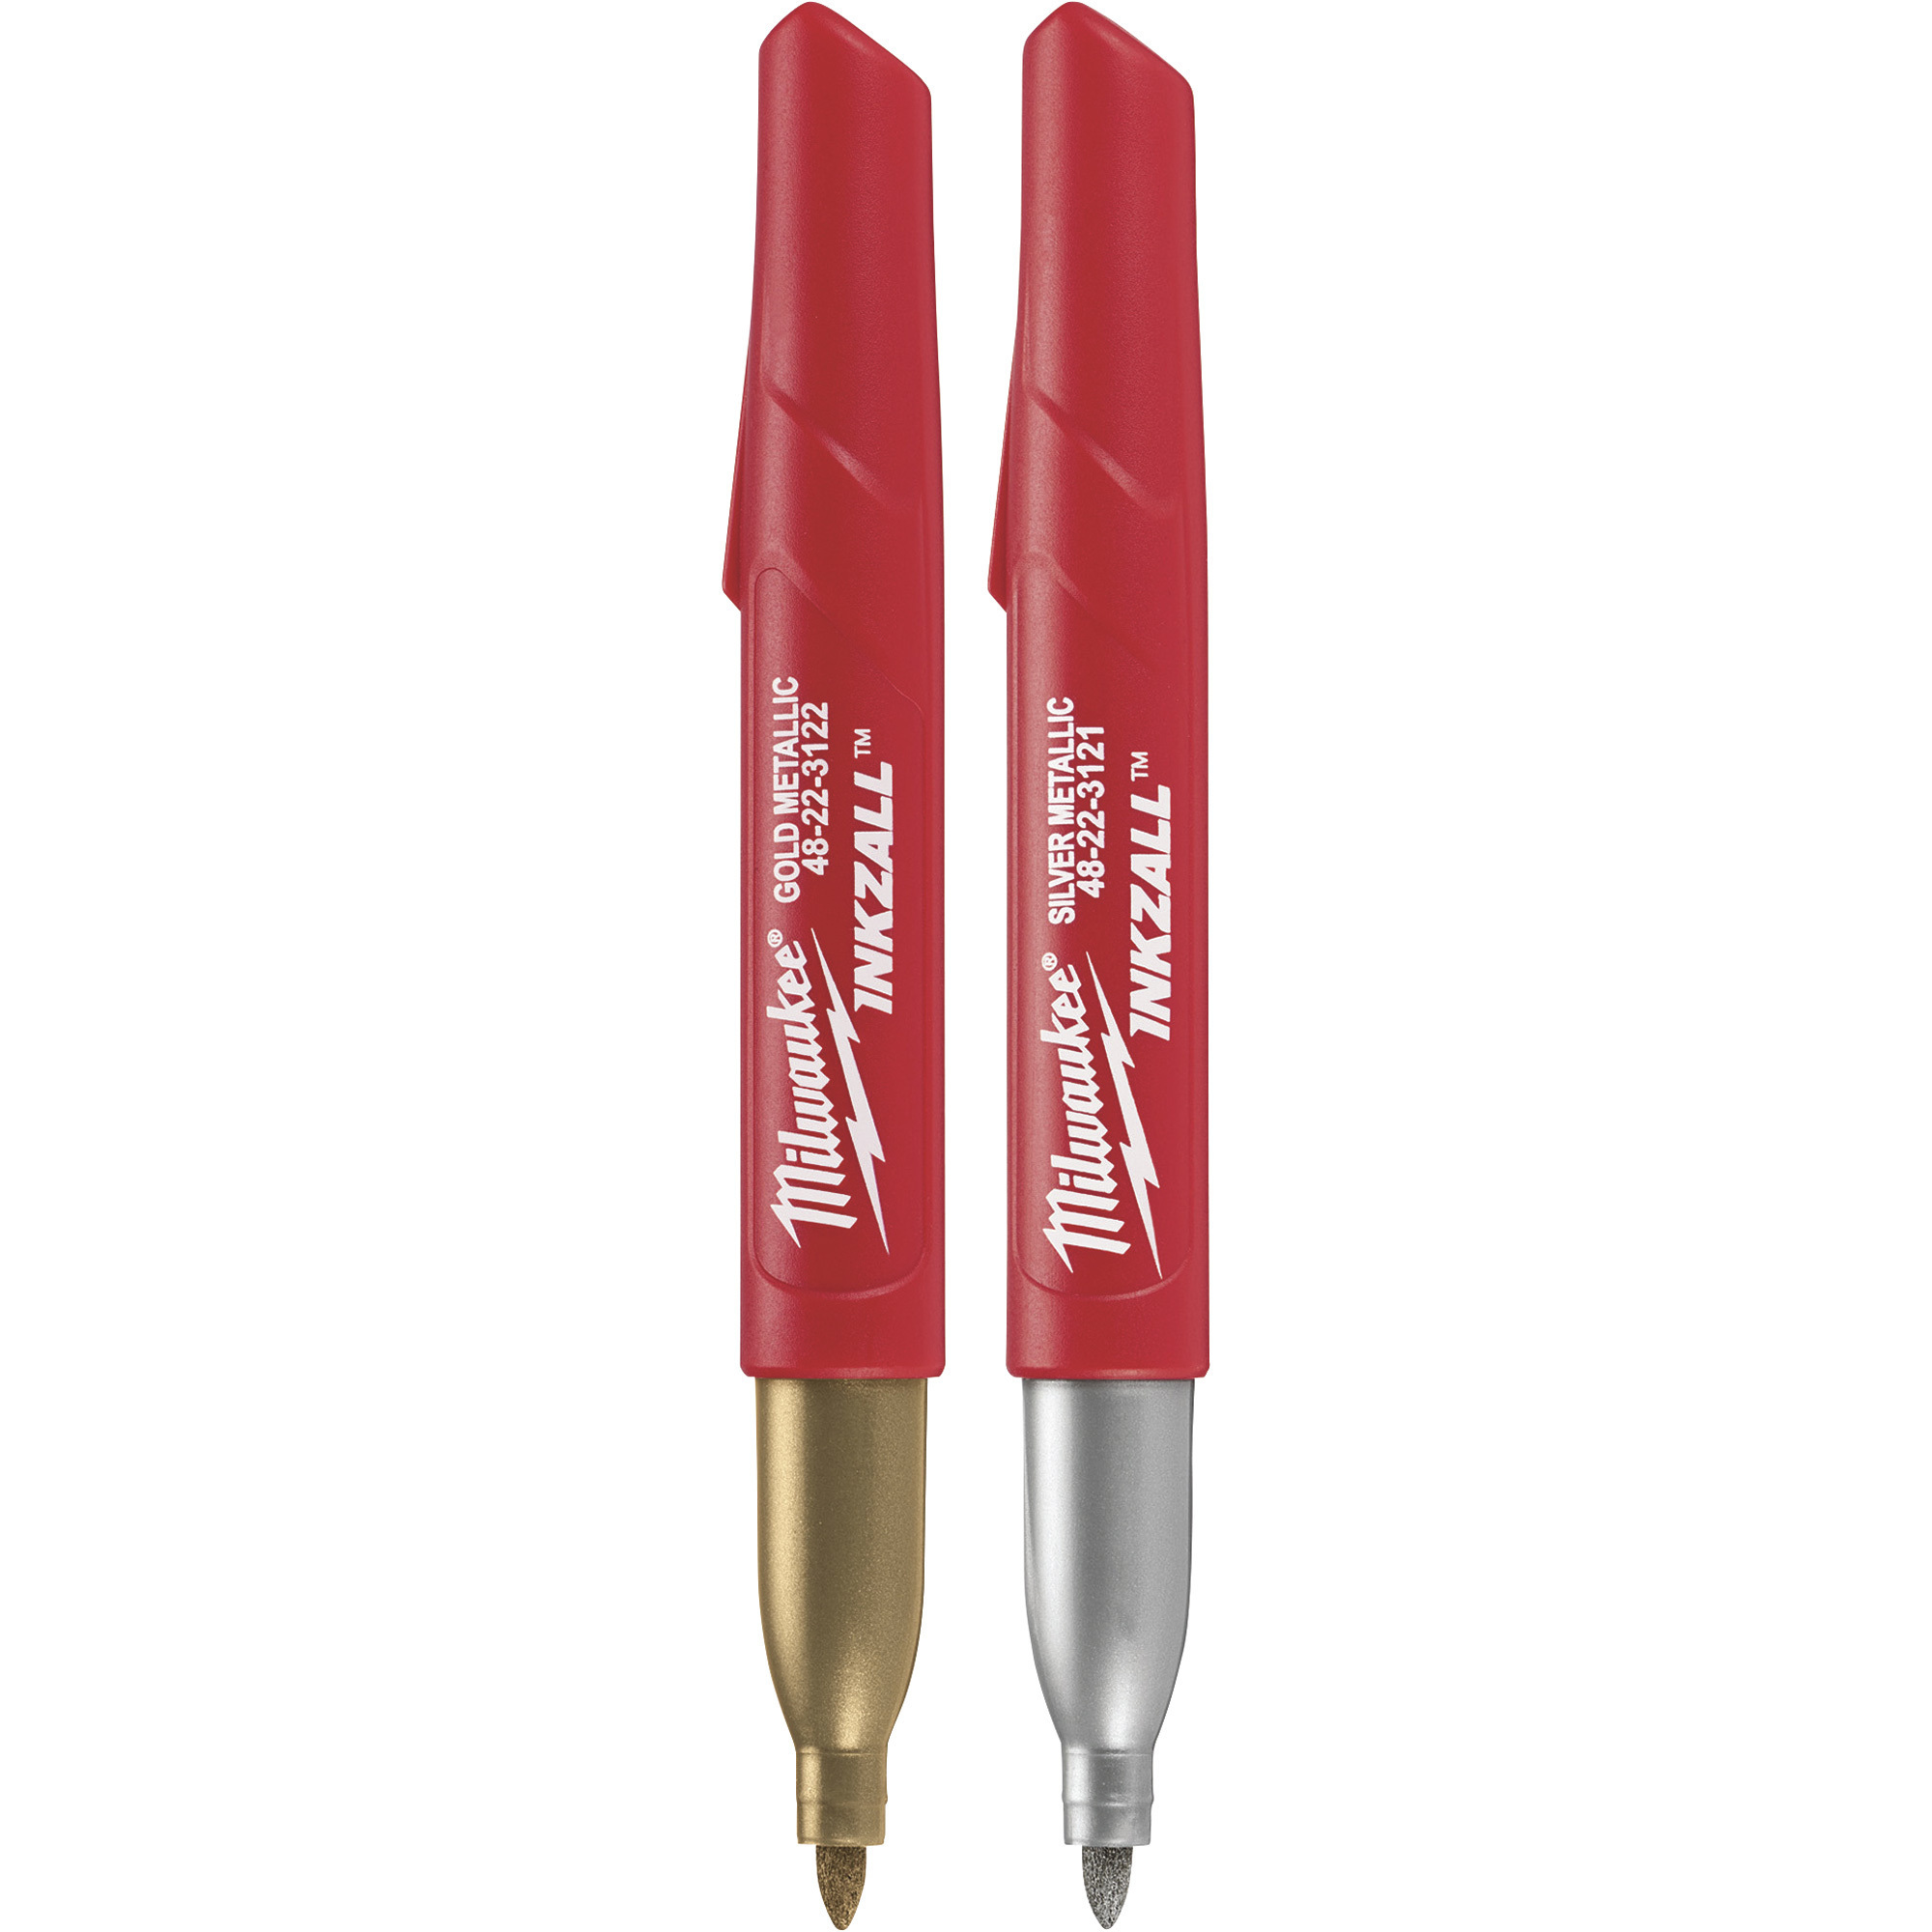 Milwaukee Inkzall Fine Point Markers — 2-Pk., Silver/Gold, Model#  48-22-3123